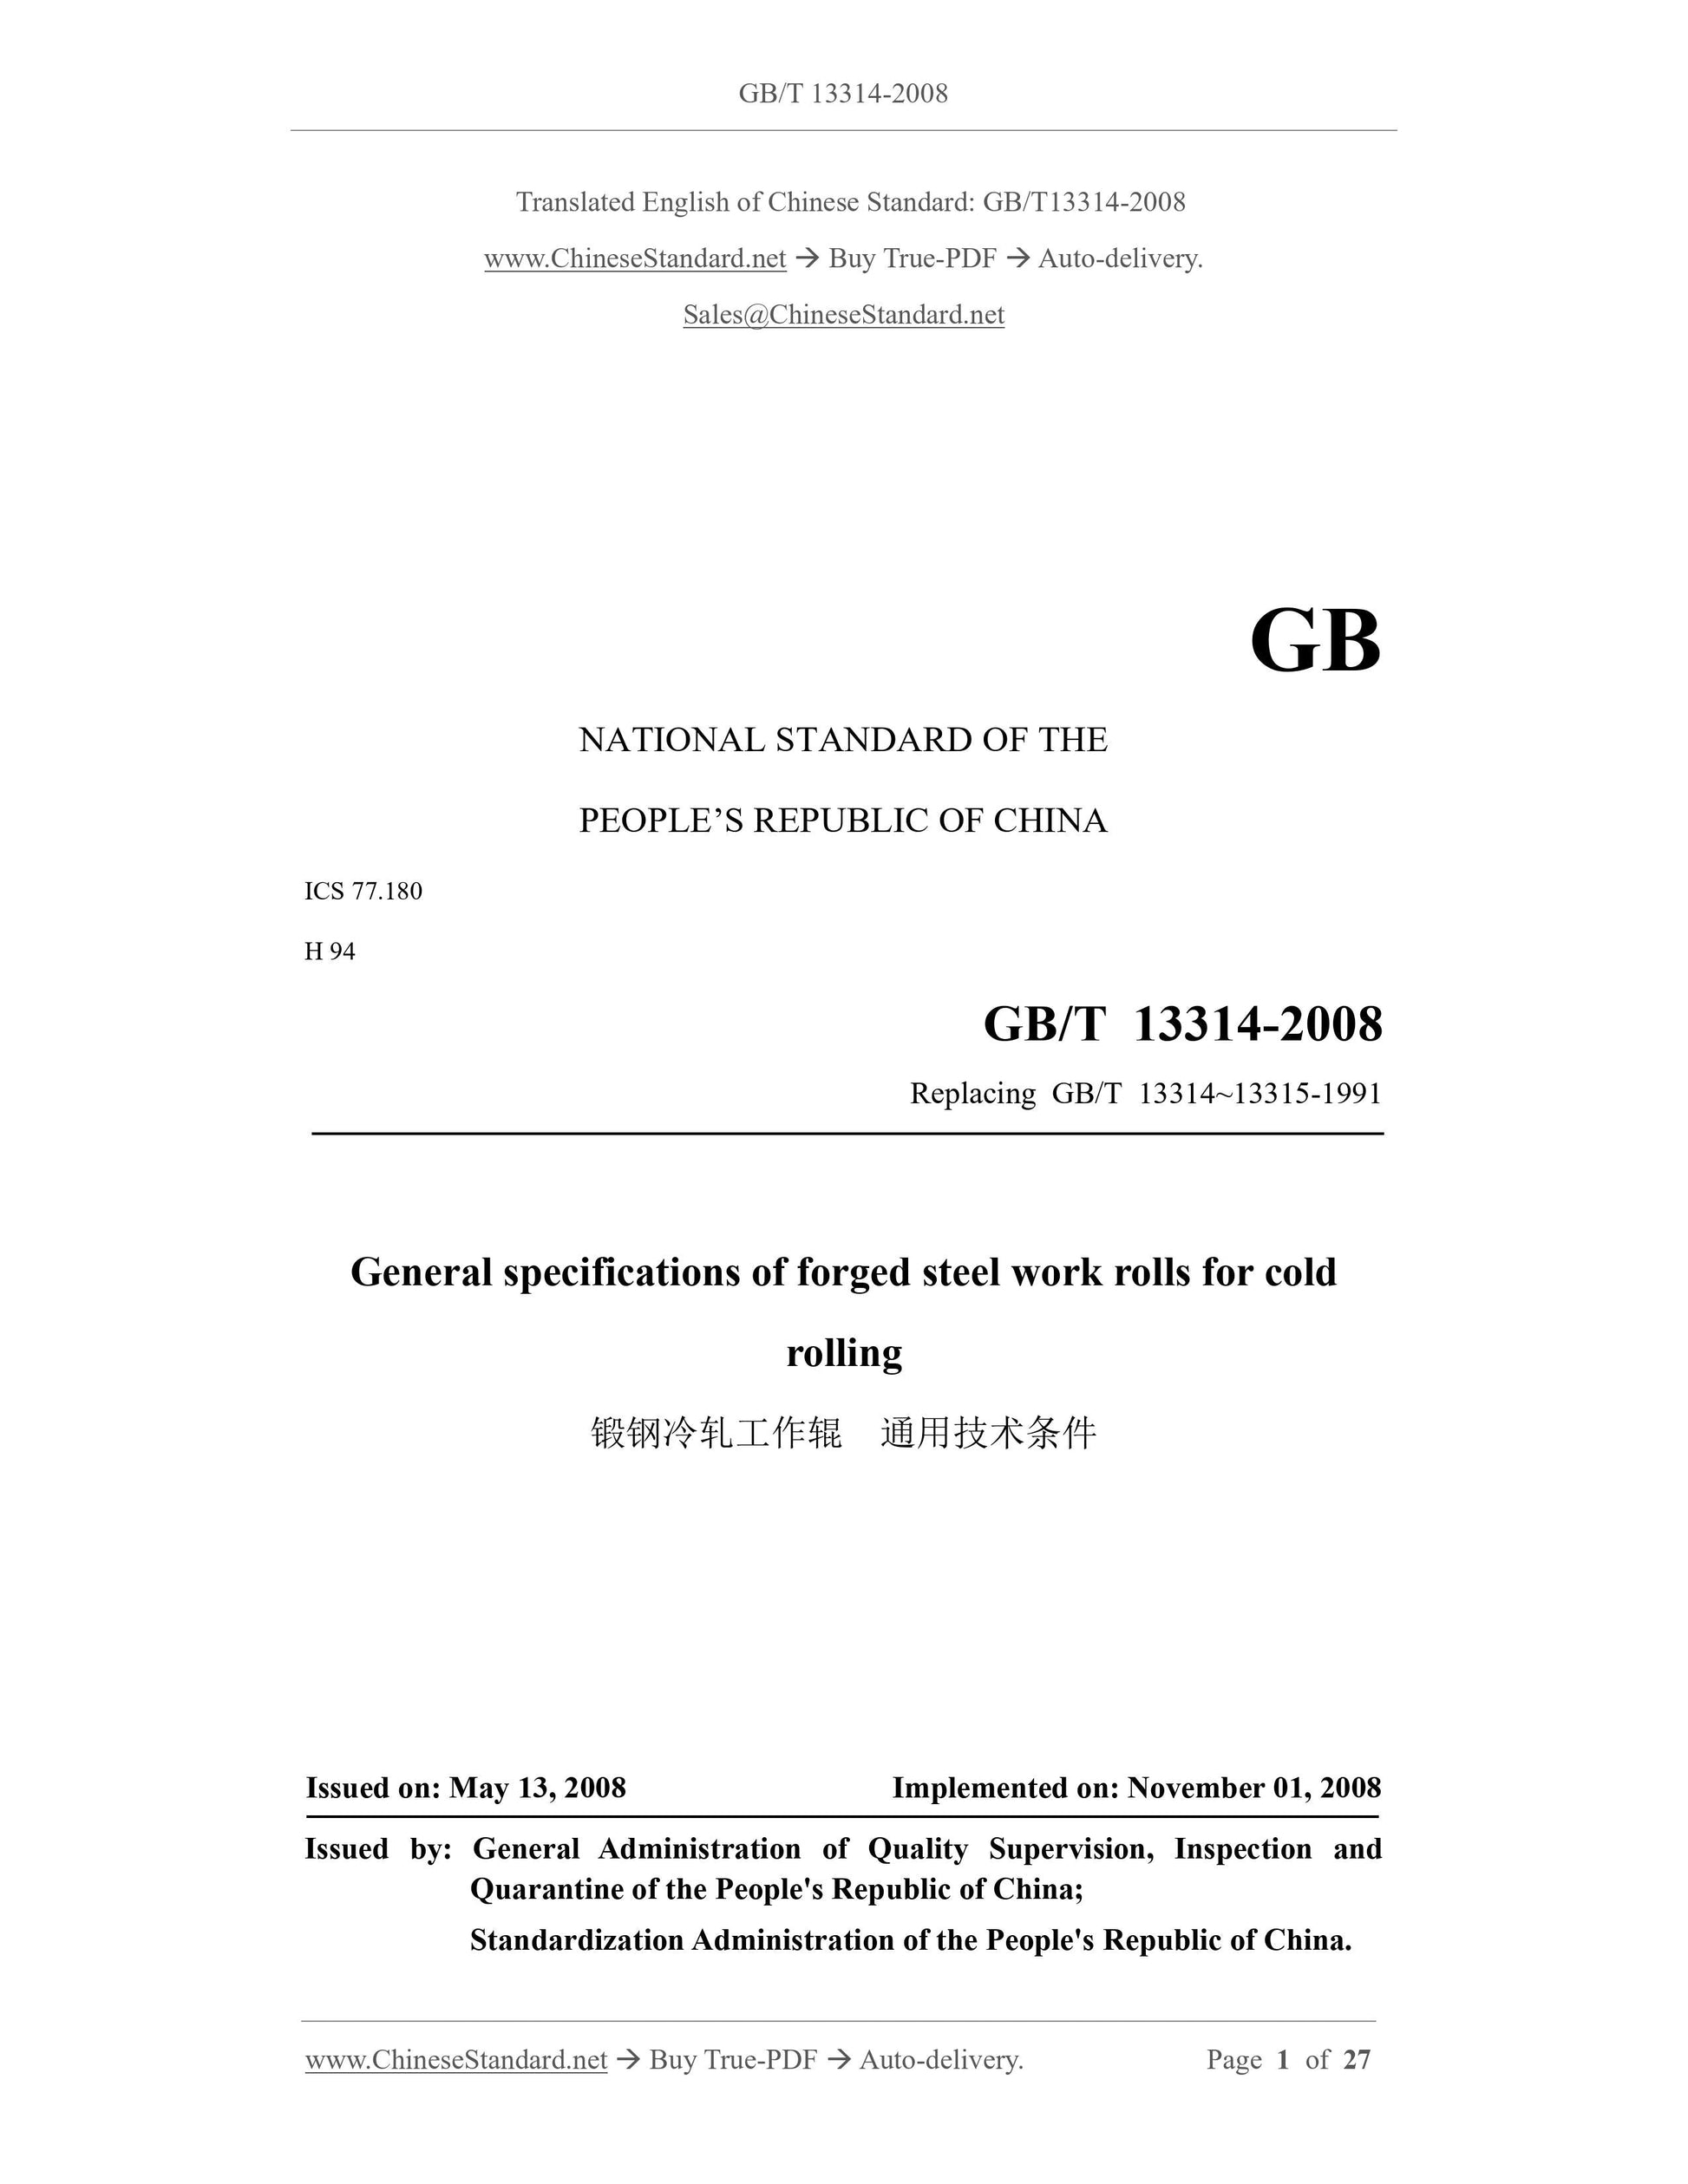 GB/T 13314-2008 Page 1